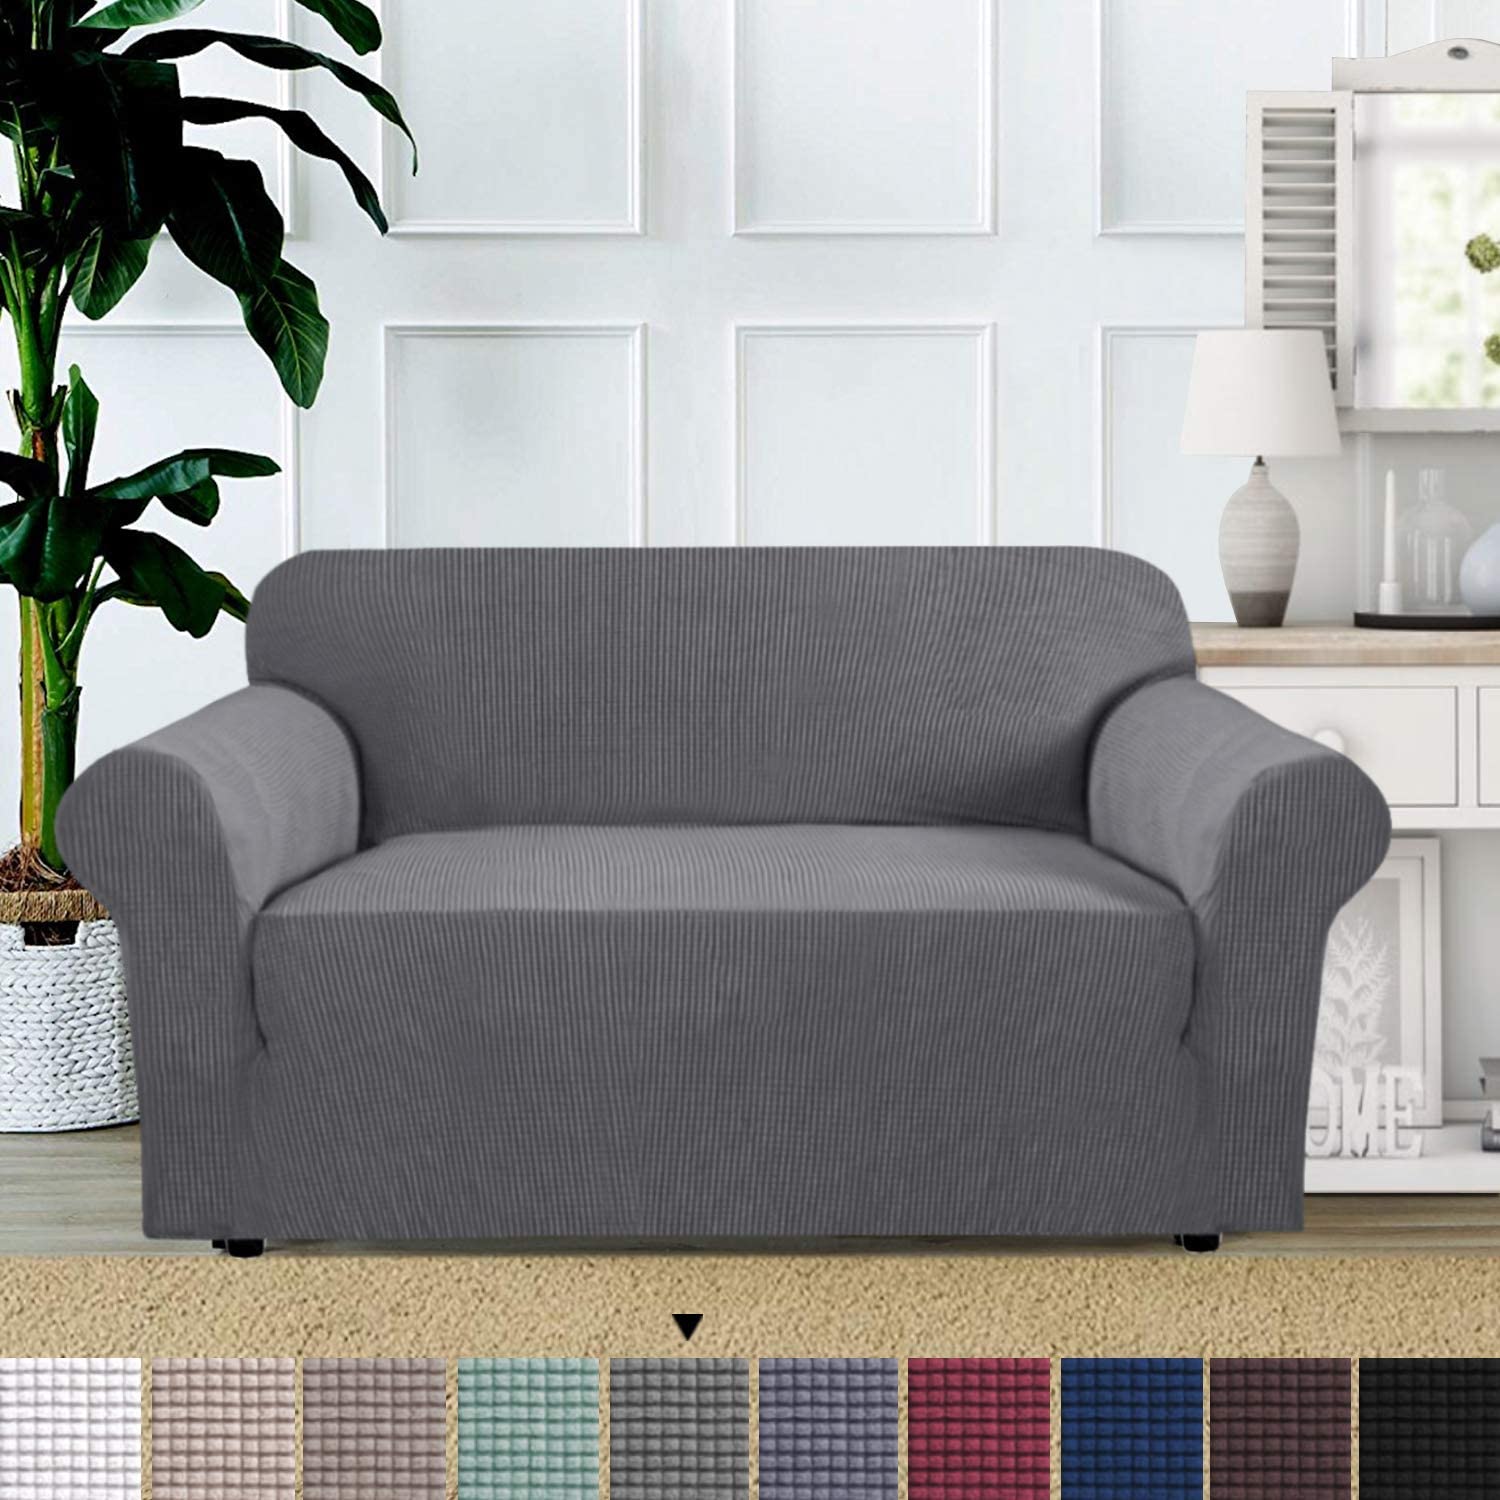 BellaHills High Stretch Furniture Protector Sofa Cover for Two Seater Durable 2 